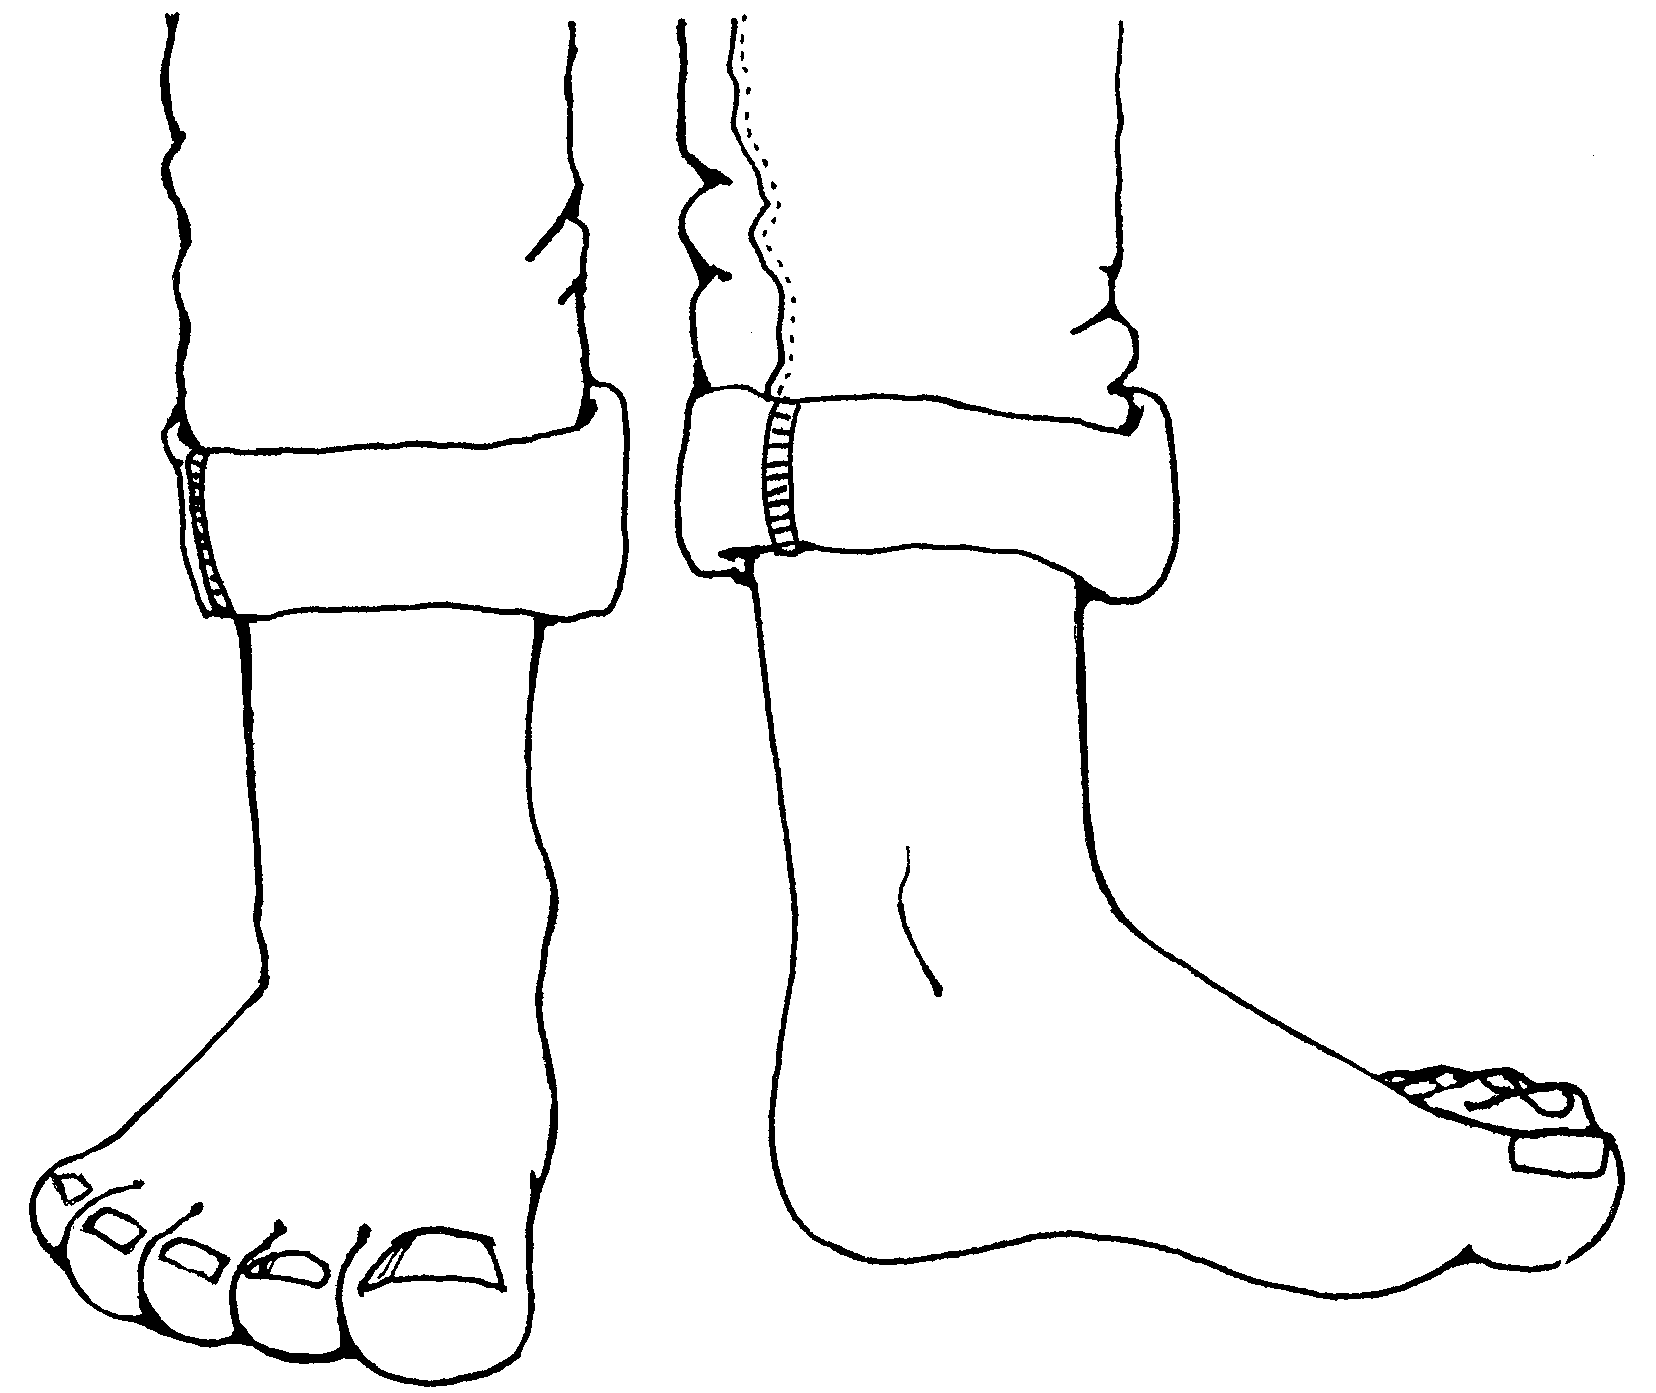 Feet clipart #3, Download drawings